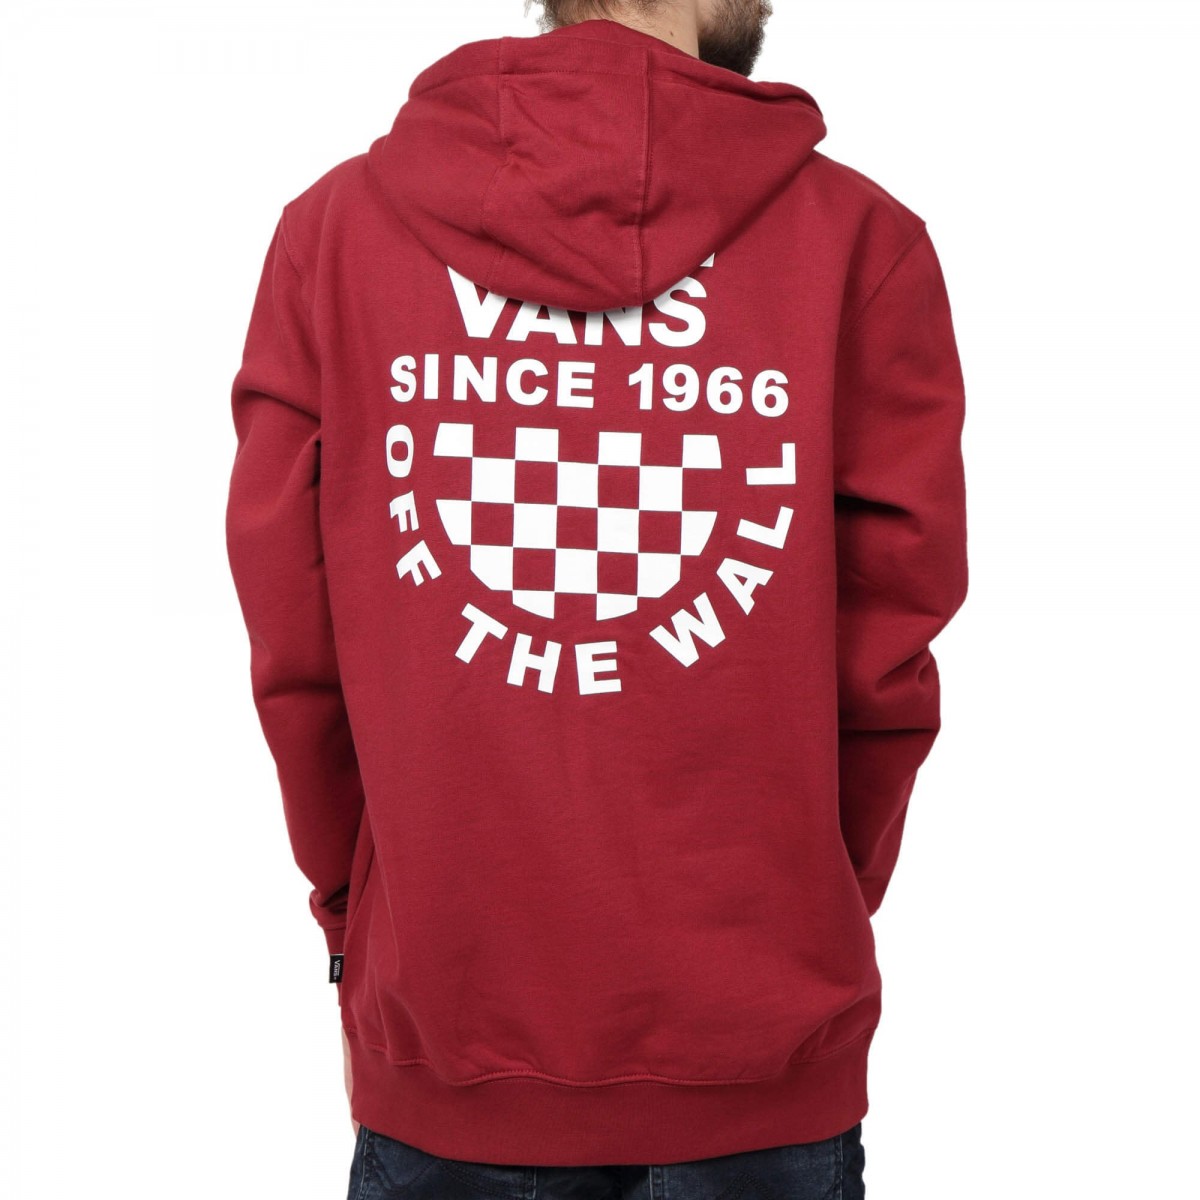 HAVE A GOOD VANS PULLOVER